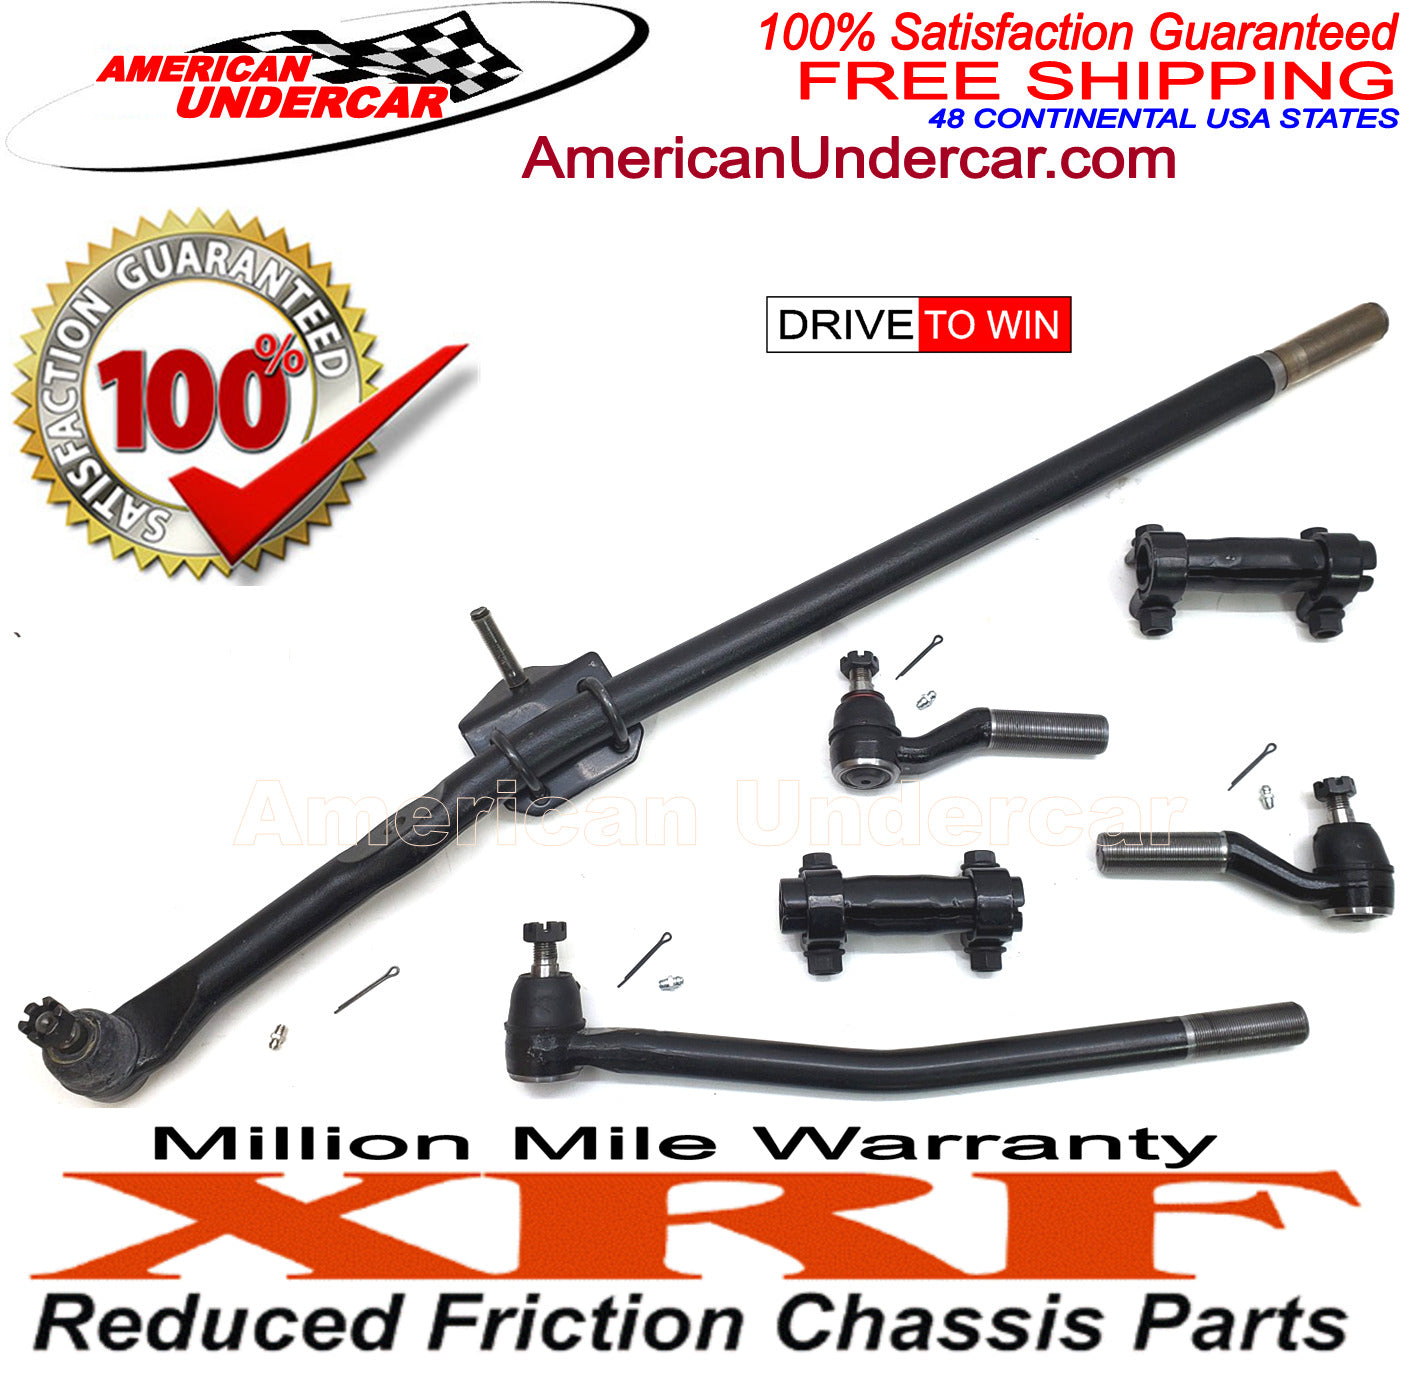 XRF Drag Link Tie Rod Sleeve Steering Suspension Kit for 1999-2006 Ford E450 DRW